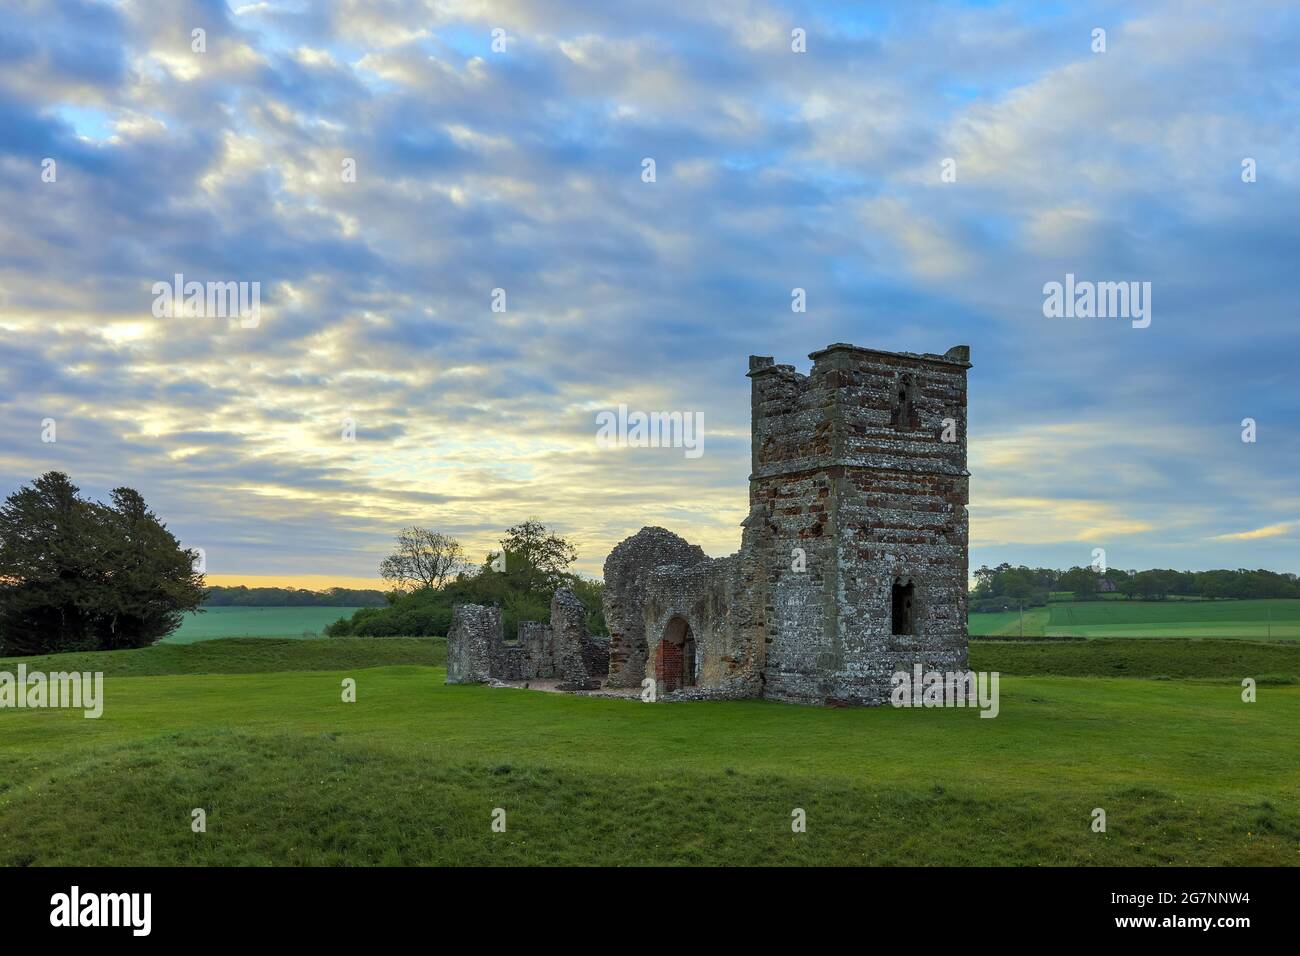 Knowlton Church and earthworks in East Dorset. The ruined medieval church is at the centre of a Neolithic ritual henge earthwork. Stock Photo